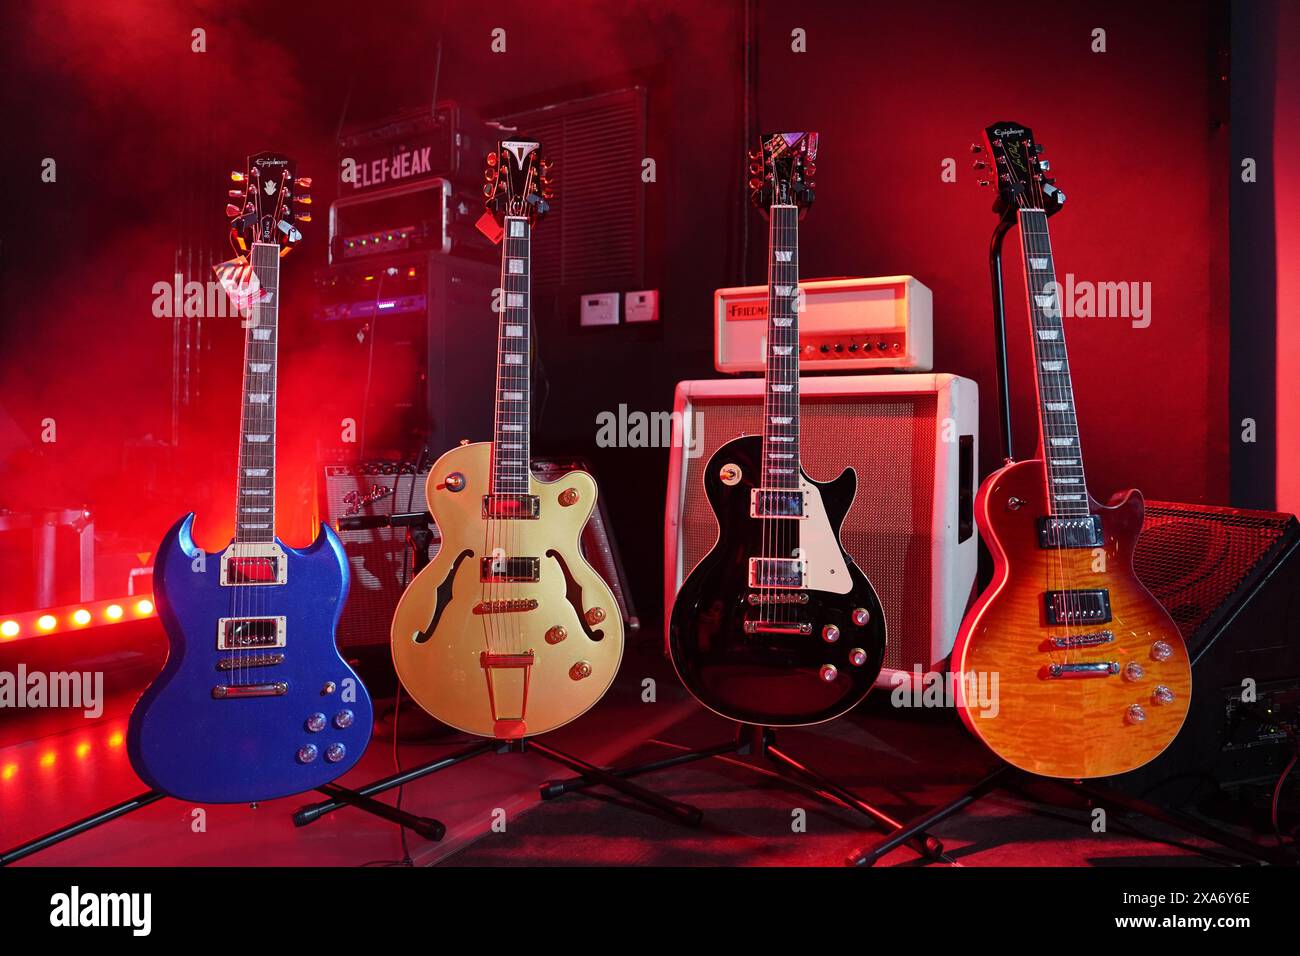 The four electric guitars displayed on stands in front of an amplifier and other music equipment Stock Photo